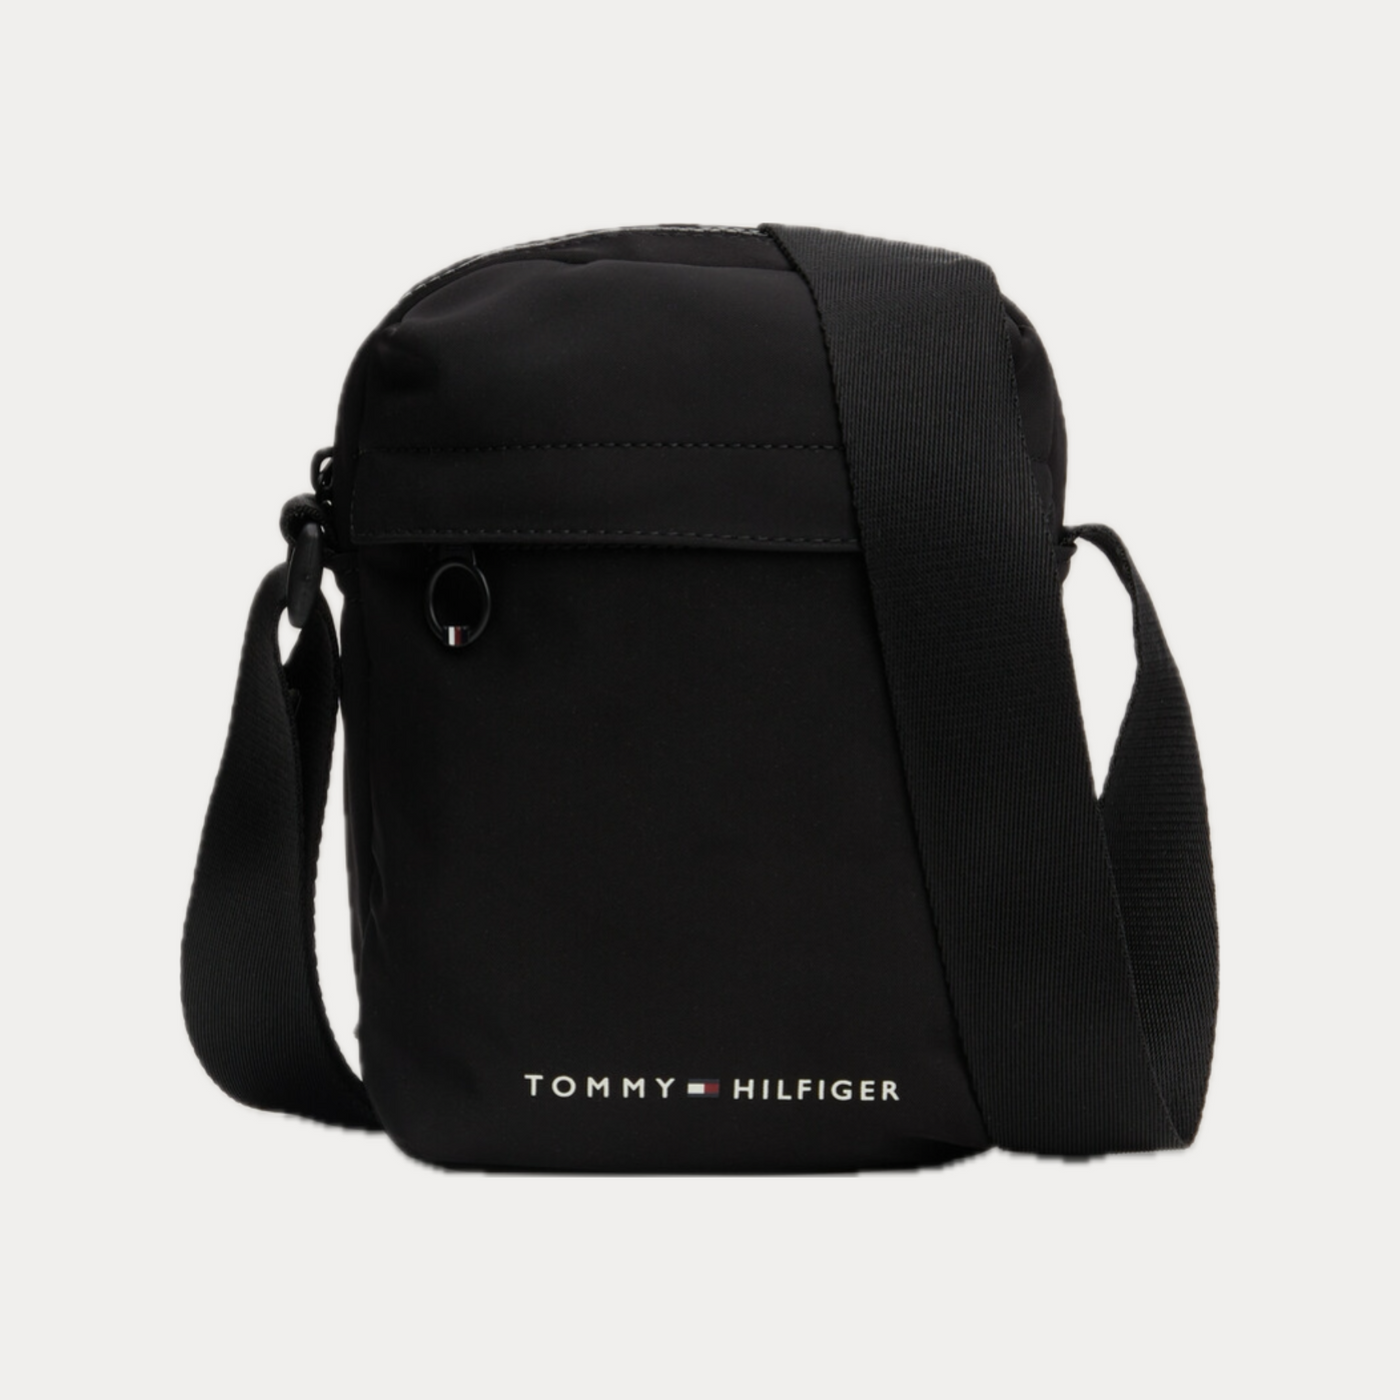 TOMMY HILFIGER - TRACOLLA ESSENTIAL